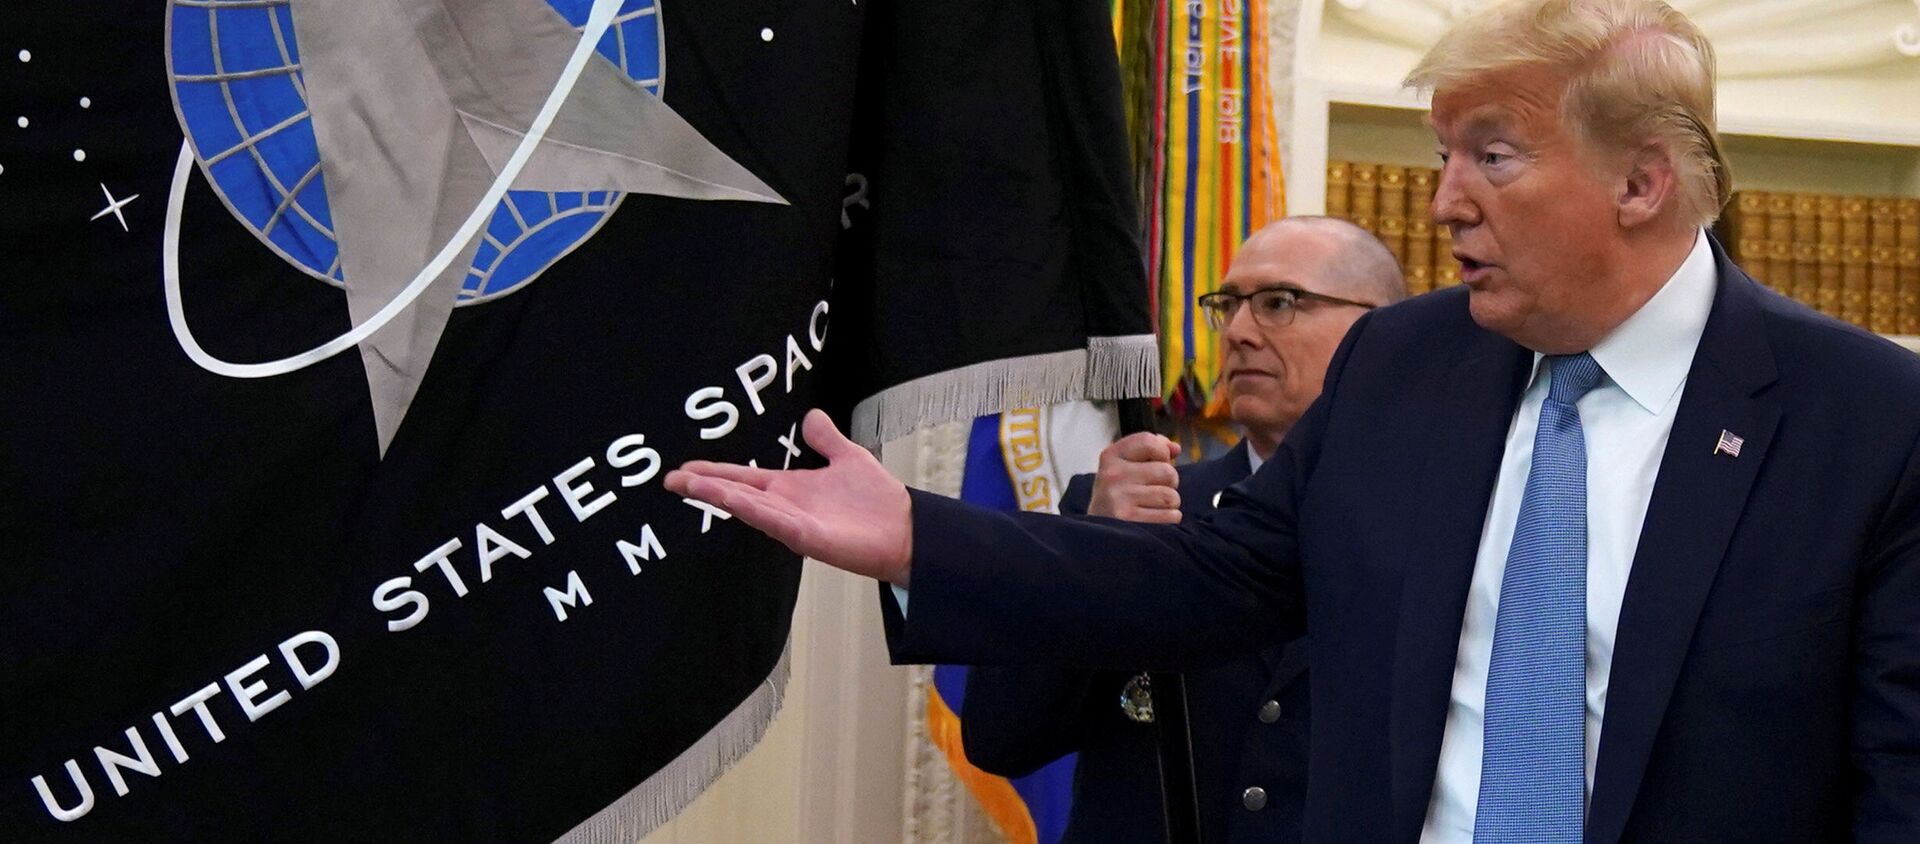 FILE PHOTO: Trump gestures towards the U.S. Space Force flag during its presentation at the White House in Washington - Sputnik International, 1920, 04.02.2021